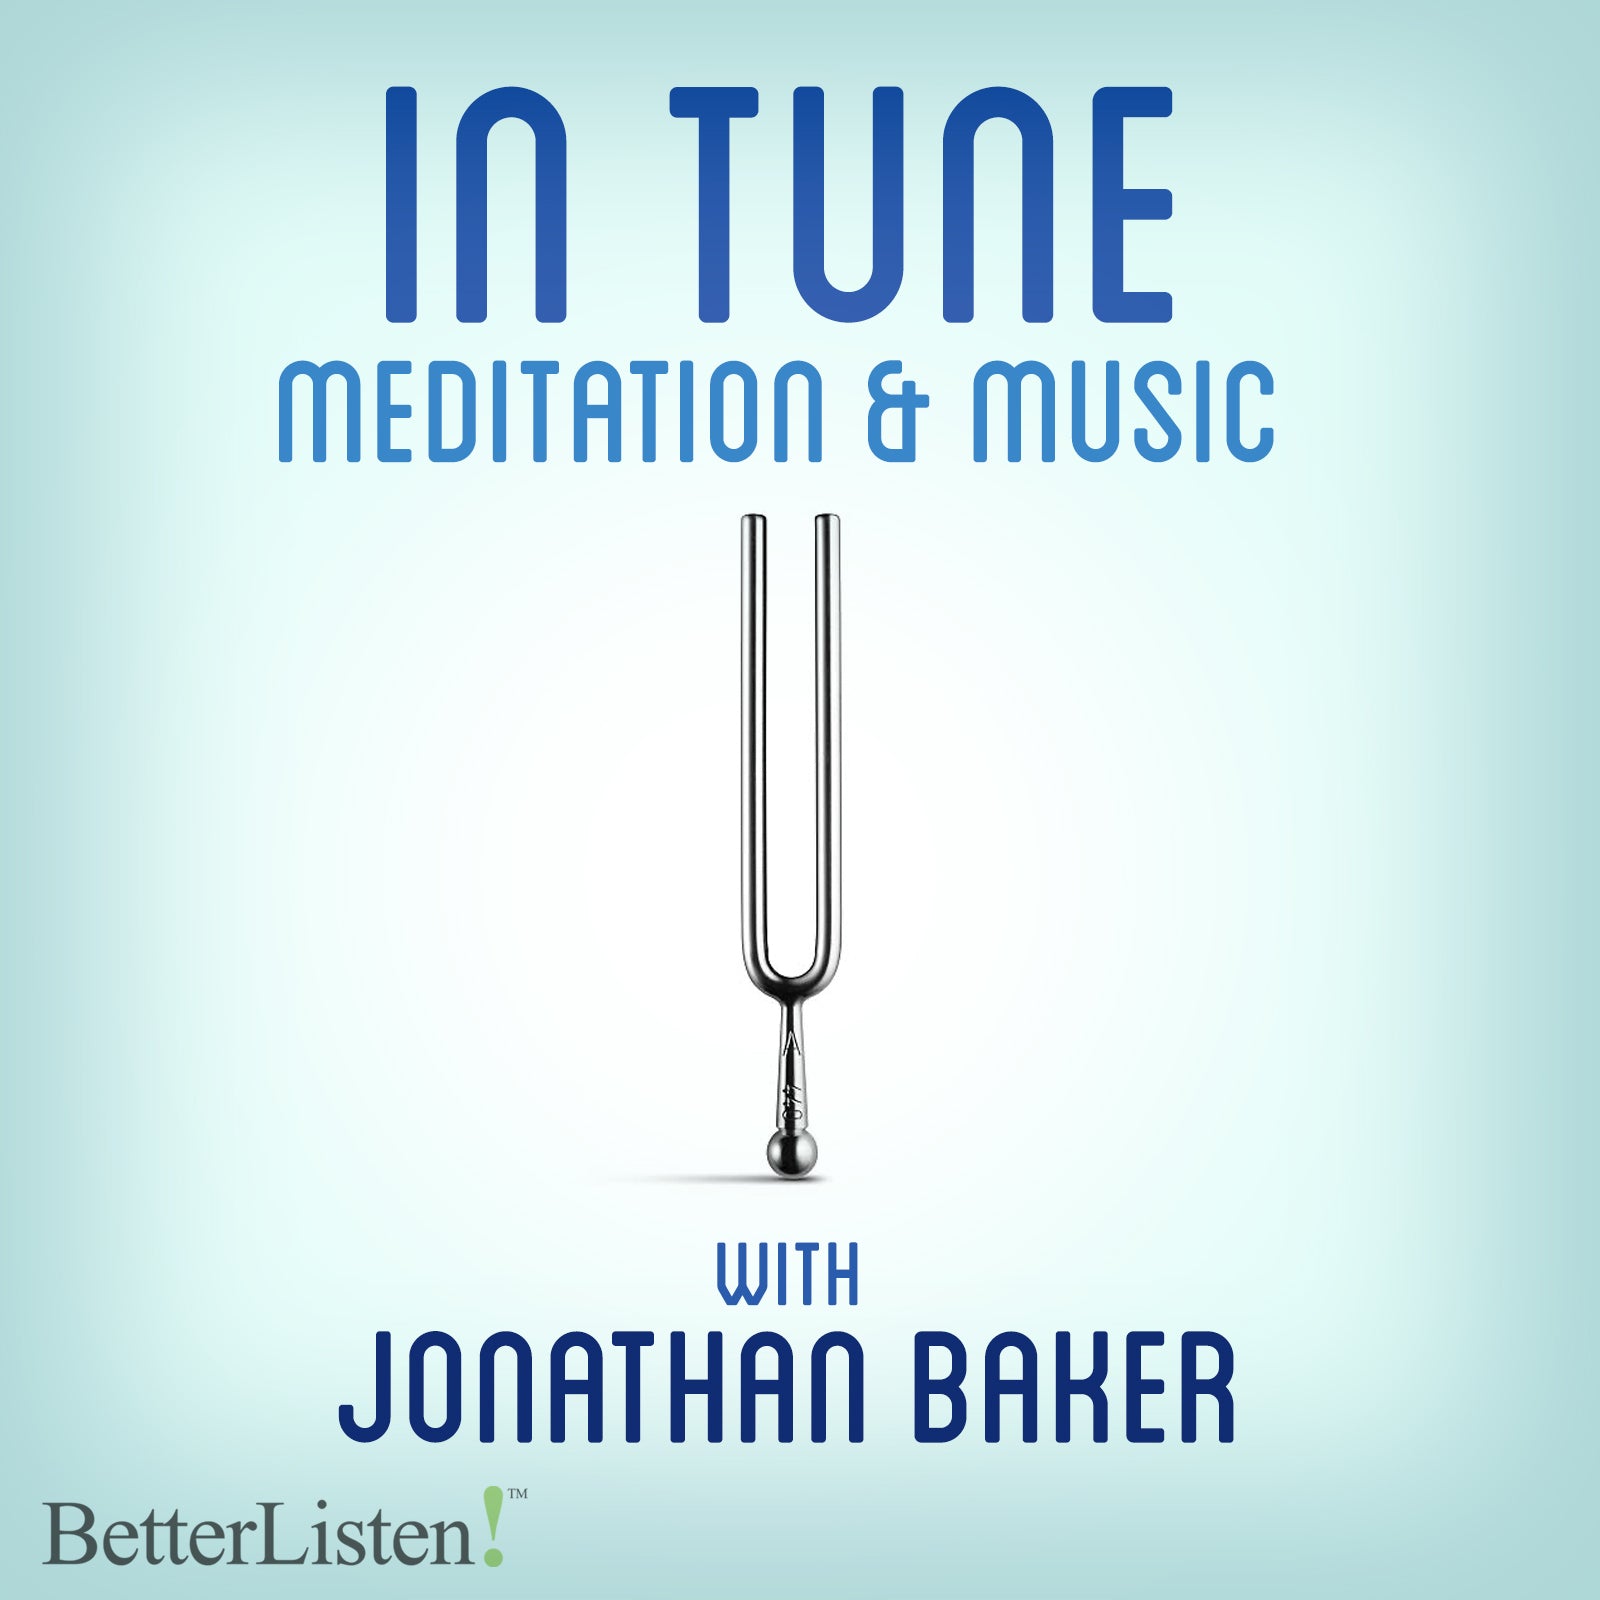 Intune Meditation and Music with Jonathan Baker